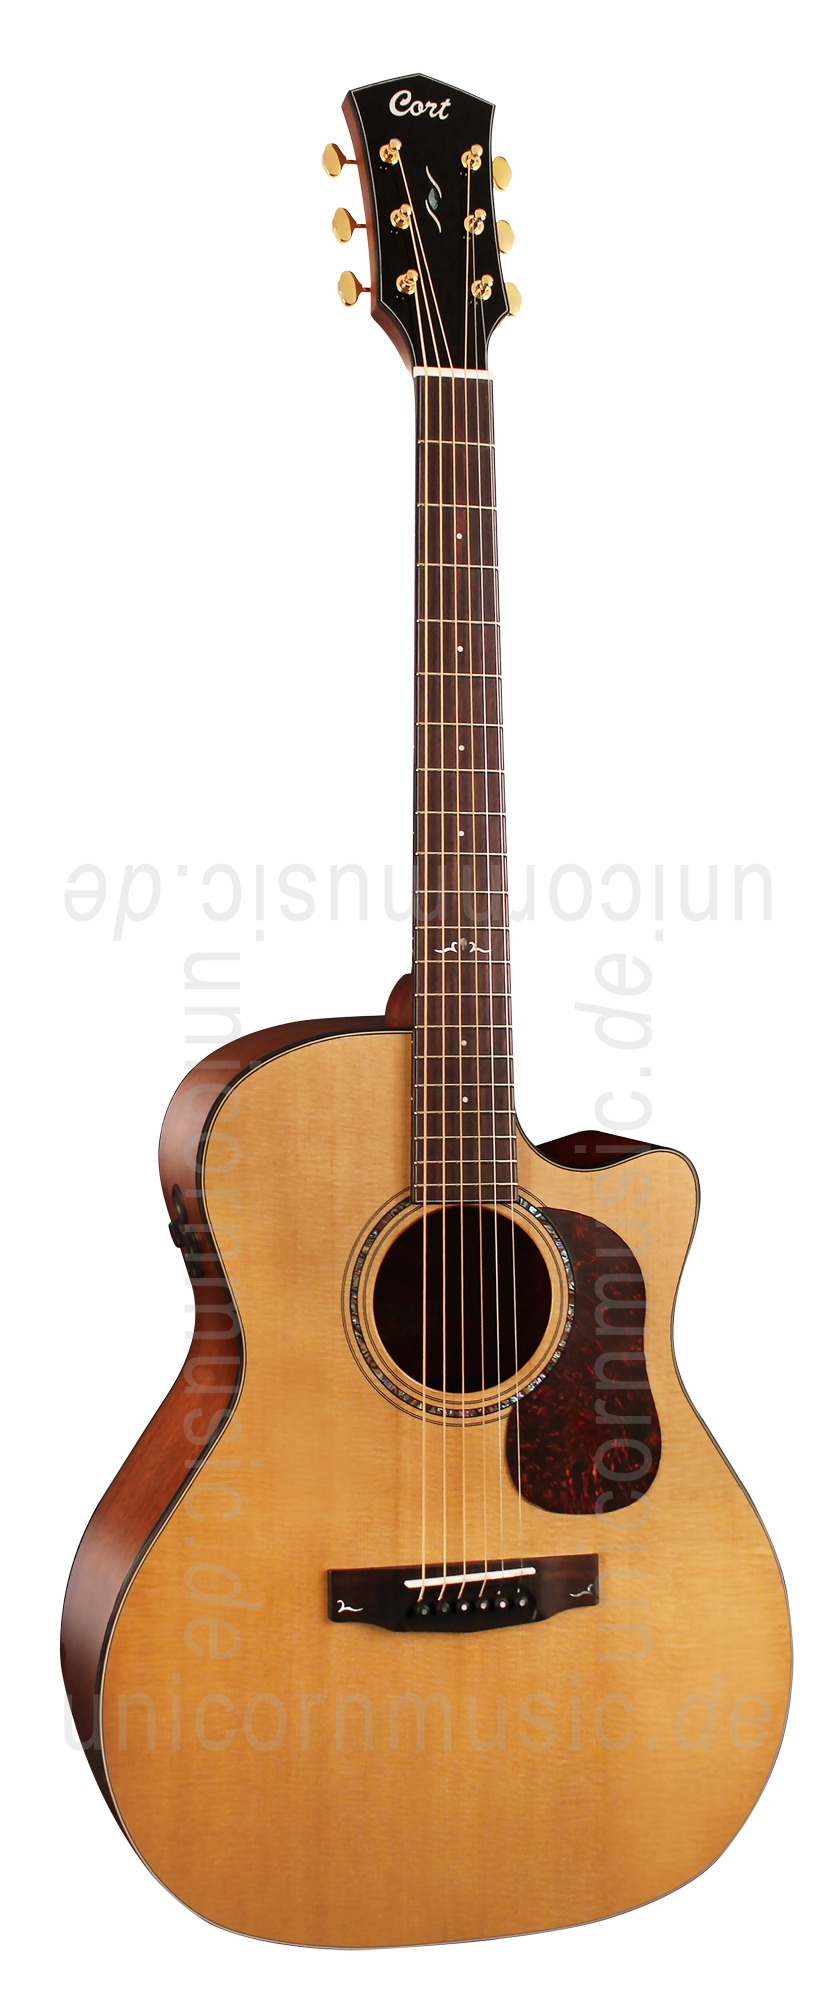 to article description / price Acoustic Guitar CORT Gold A6 - Auditorium- Fishman - Cutaway - solid spruce top